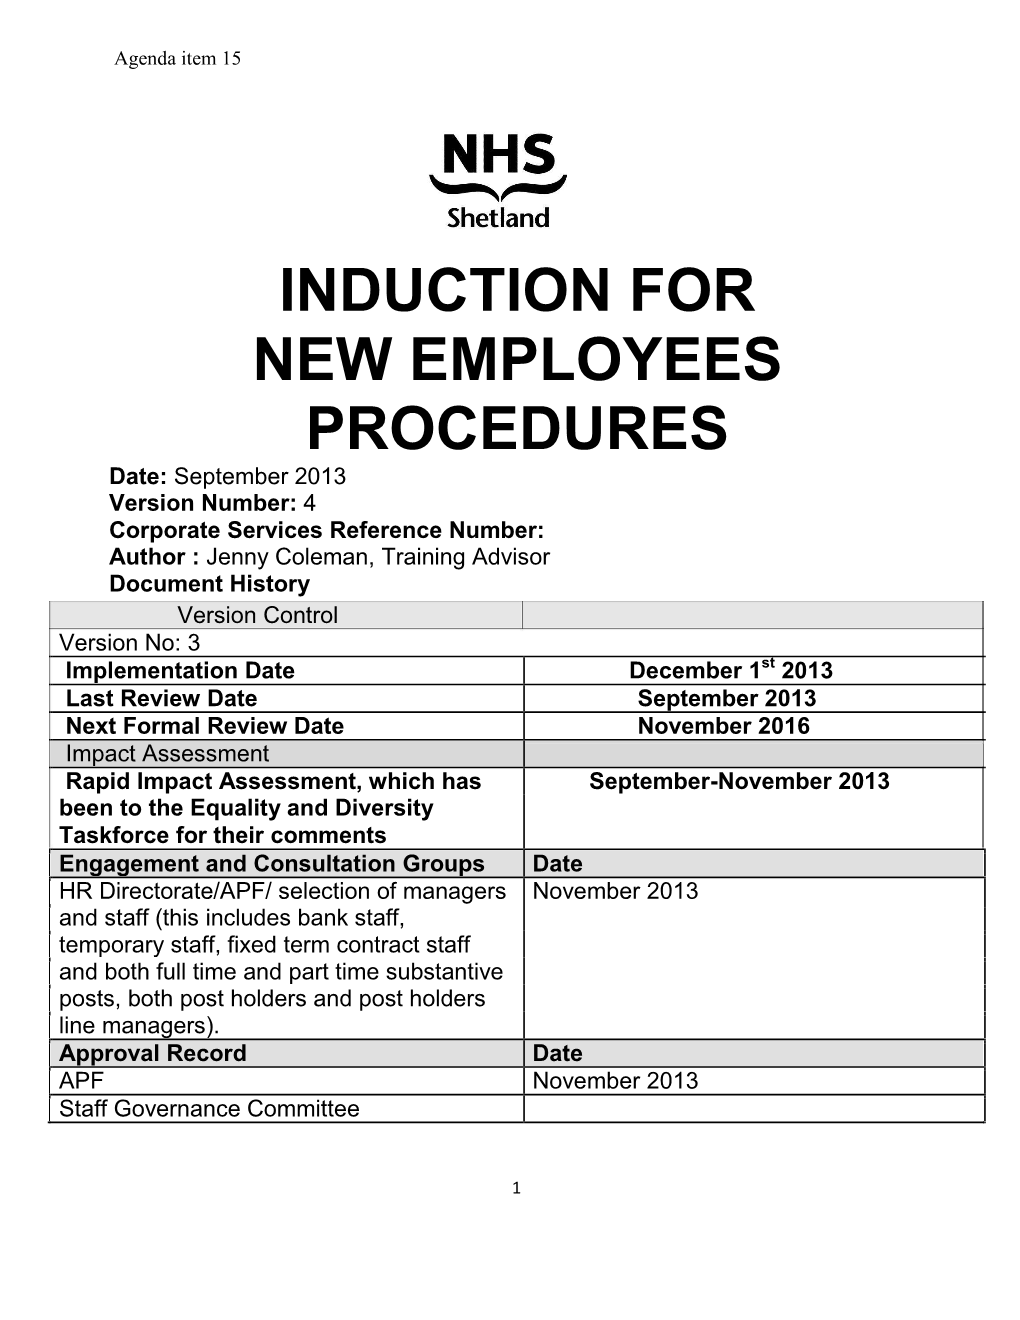 Induction for New Employees Procedures